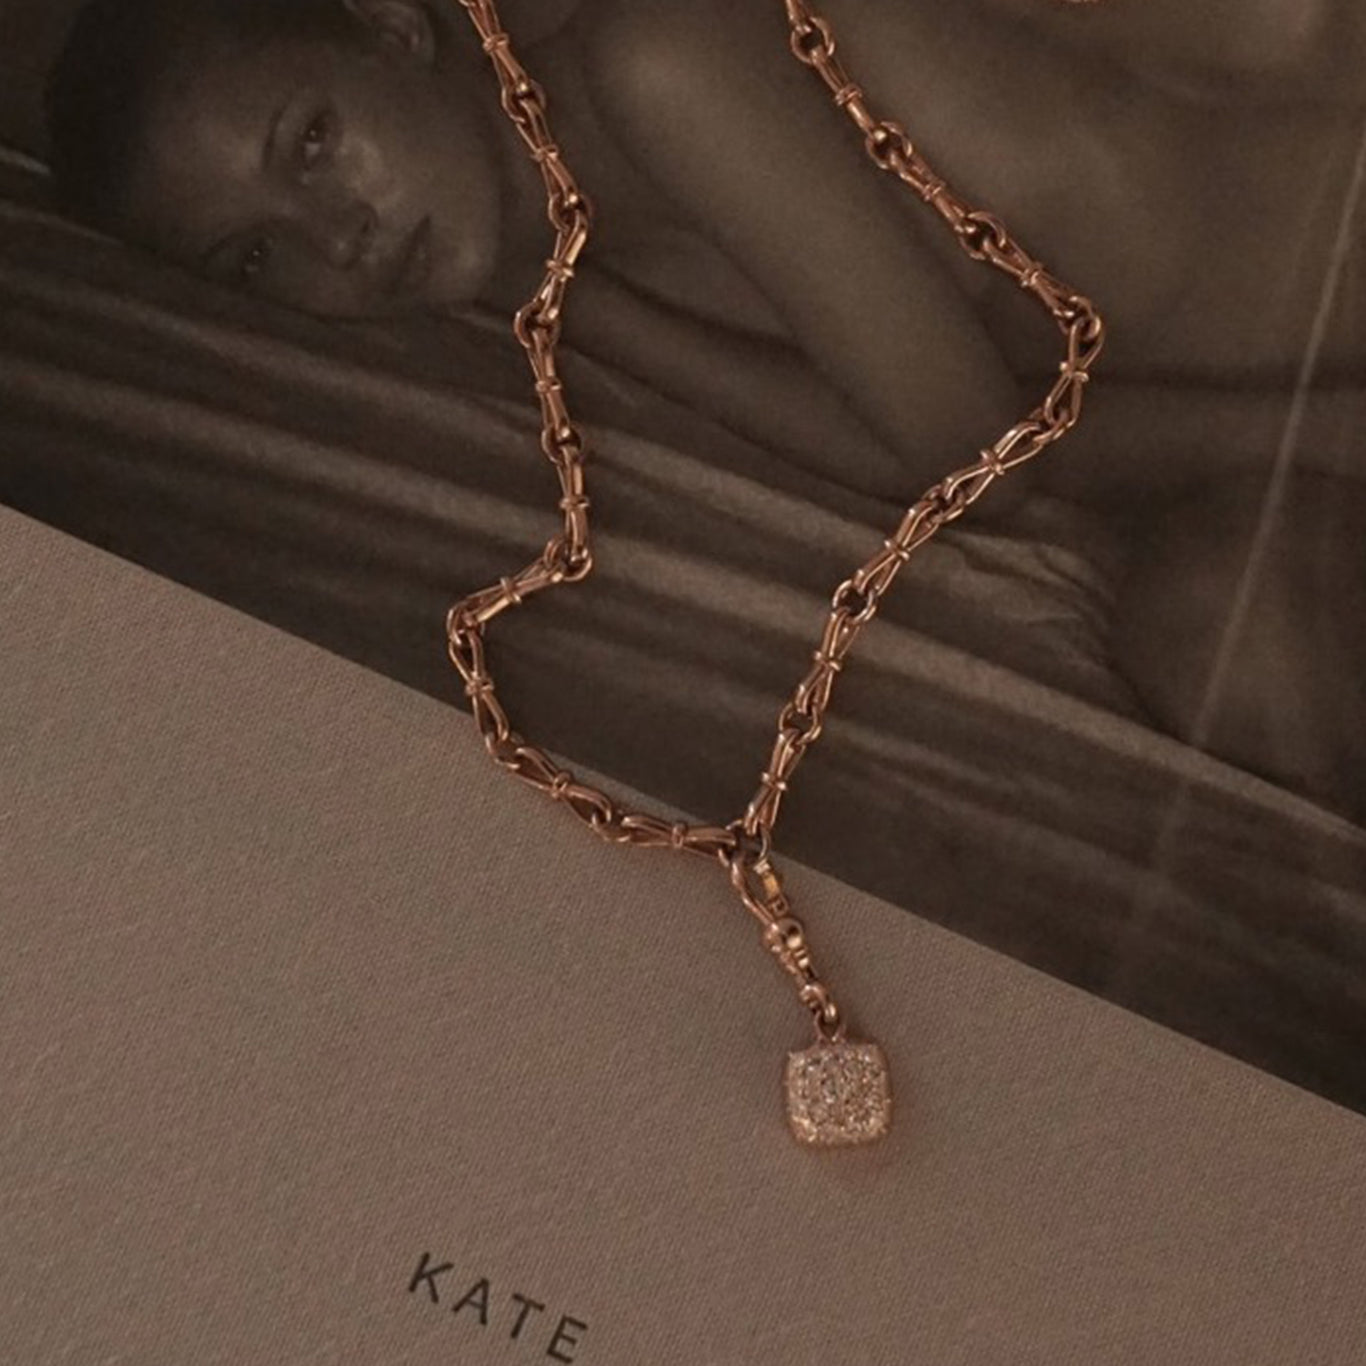 Trilogy Necklace shown in Rose Gold